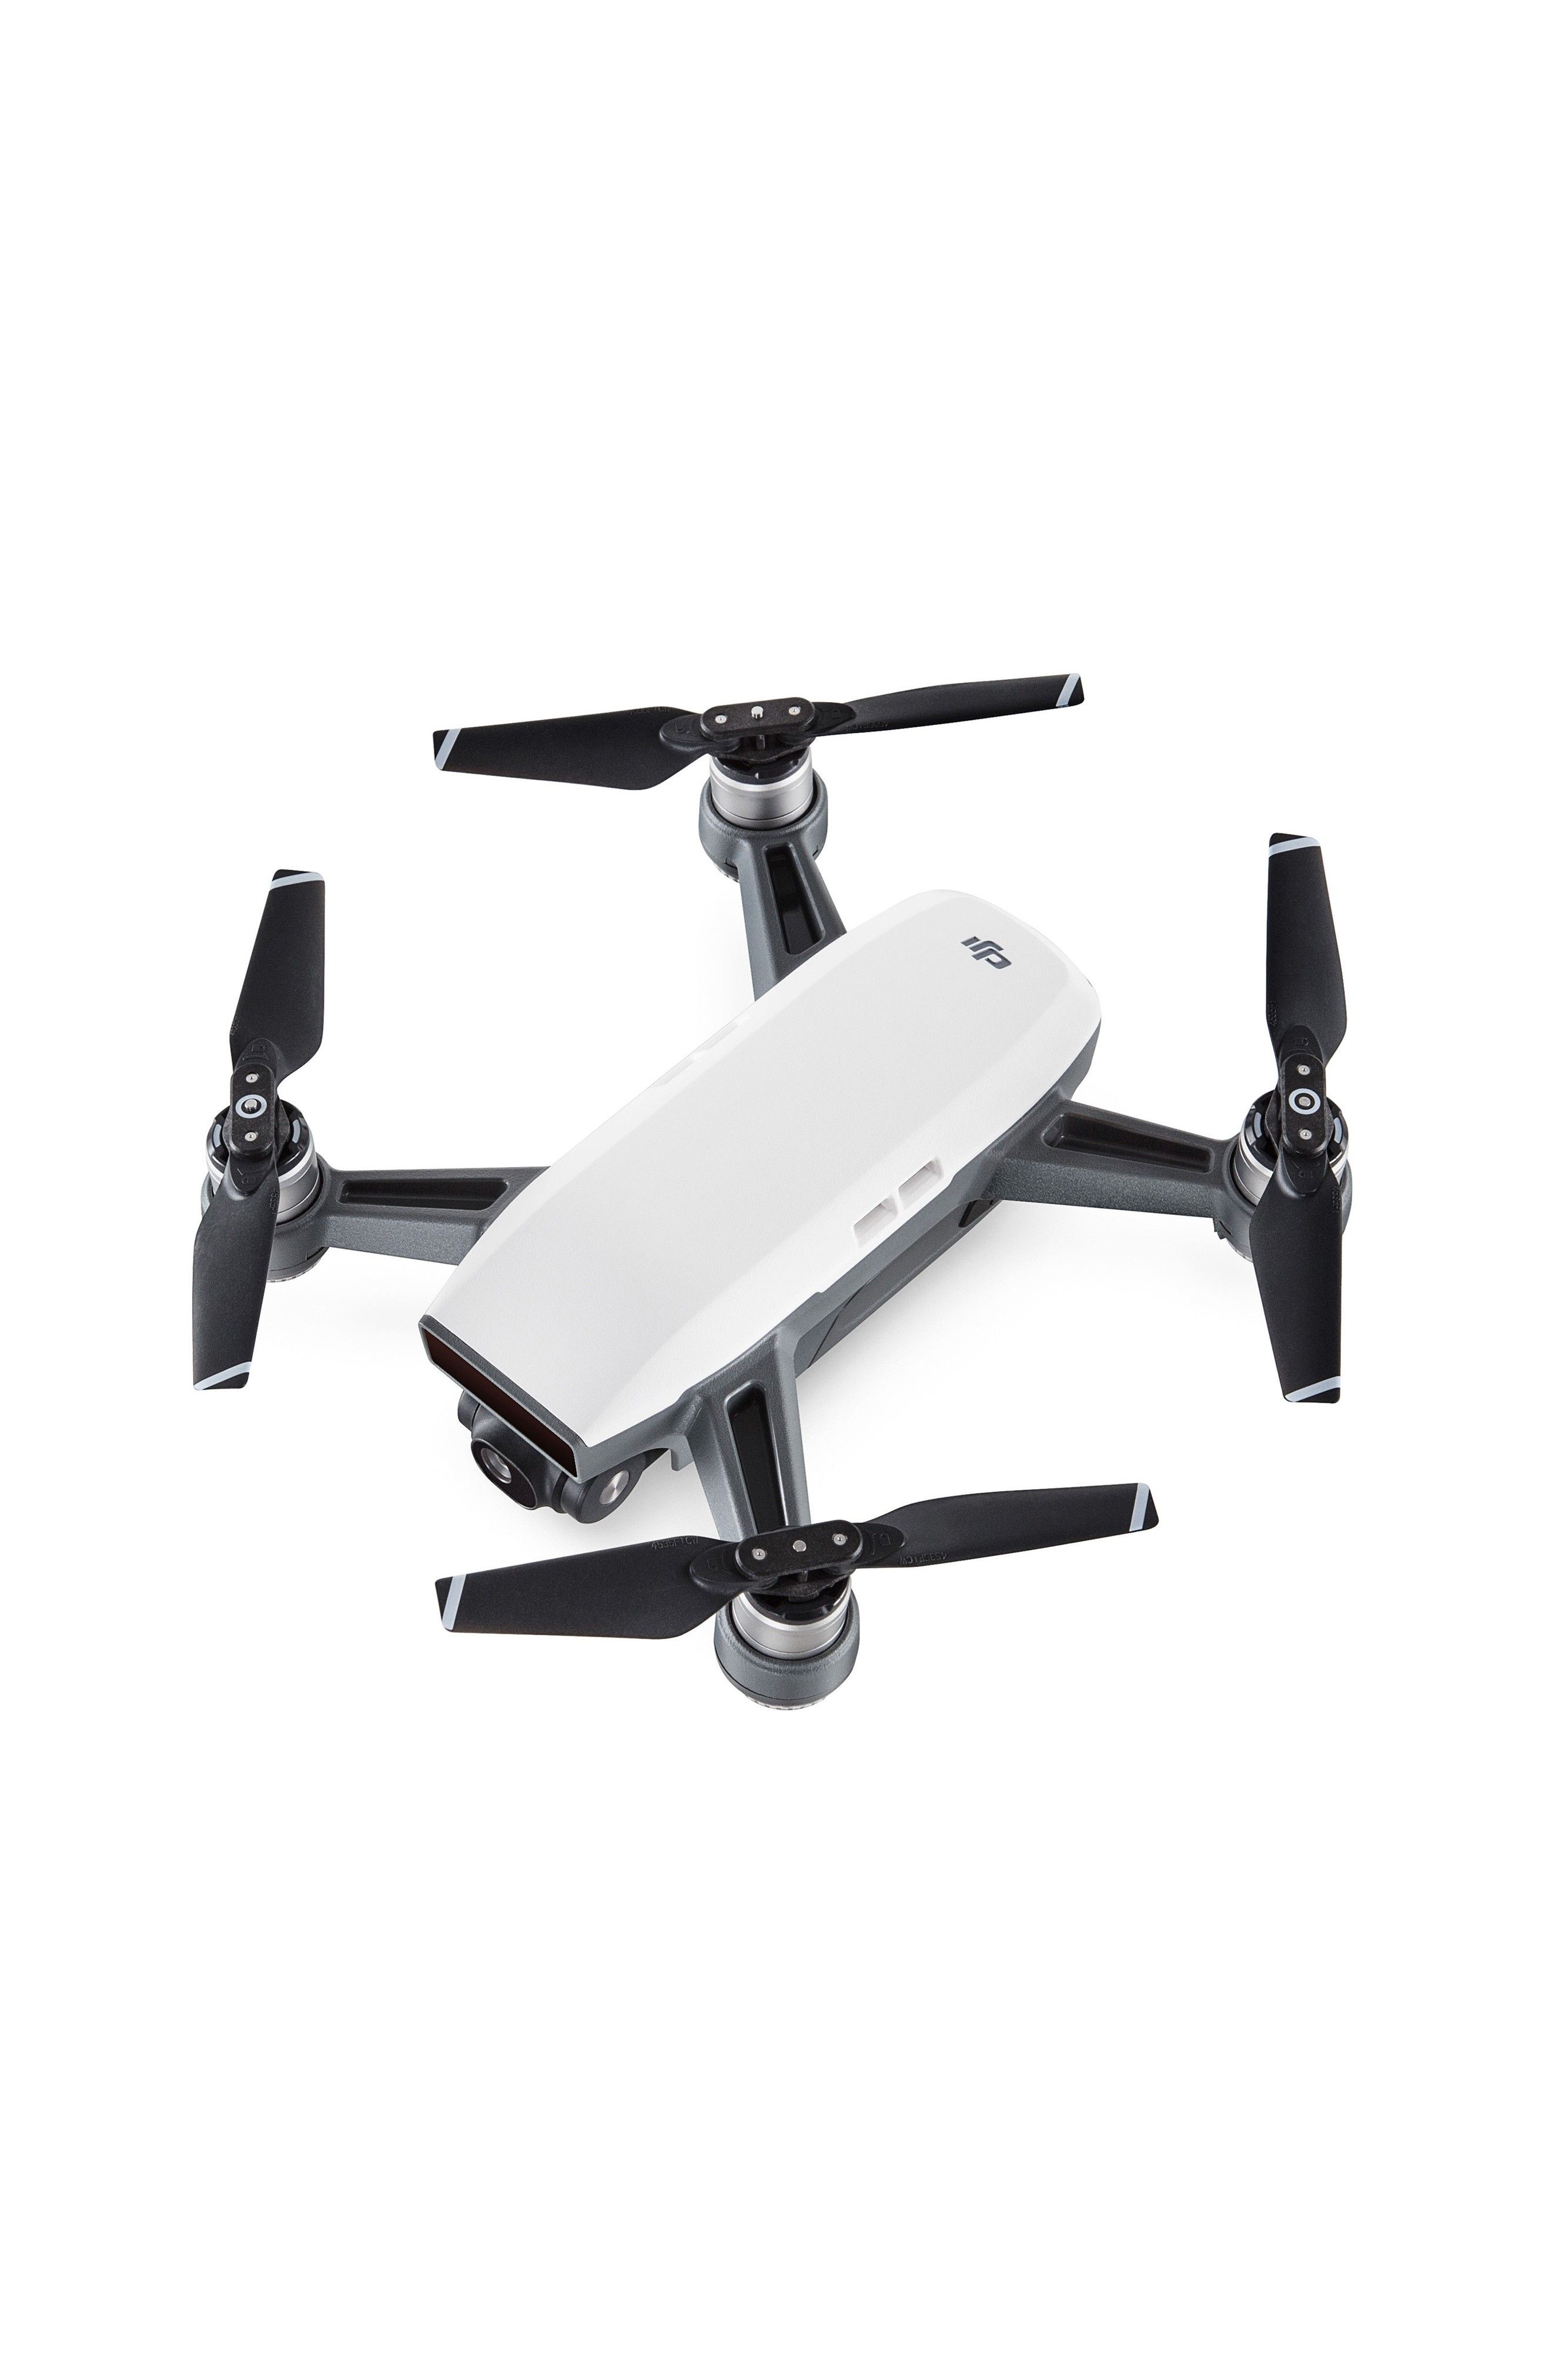 Spark Mini Flying Quadcopter | Black Friday + Cyber Monday Deals ...